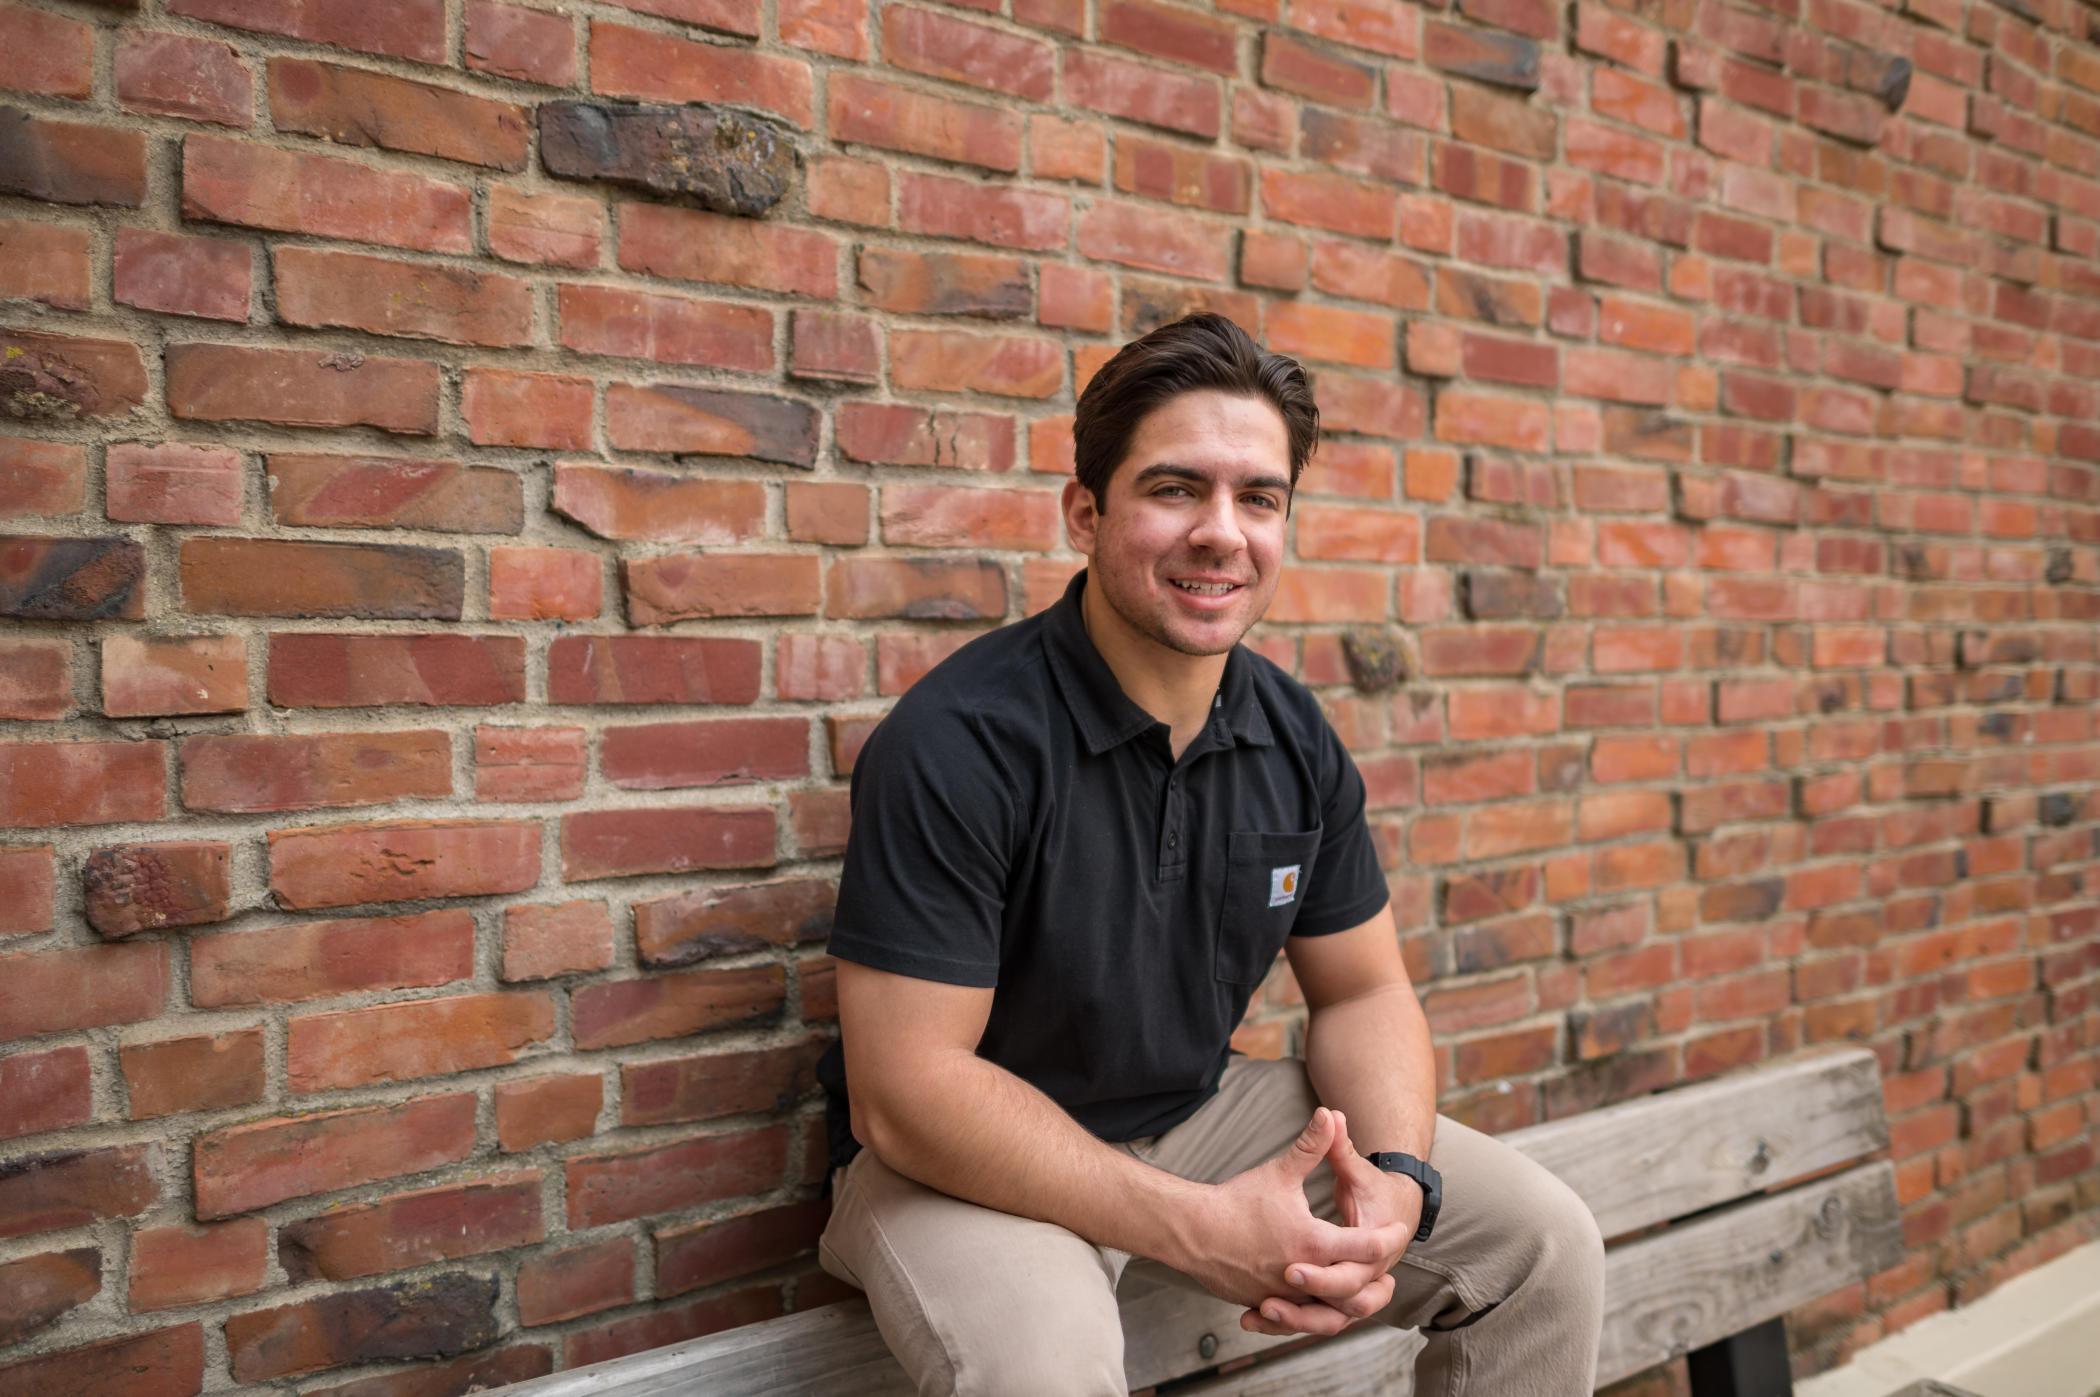 Mateus Avalos, wearing a black polo shirt and khaki pants, sits on a bench in front of a brick building for a posed photo.